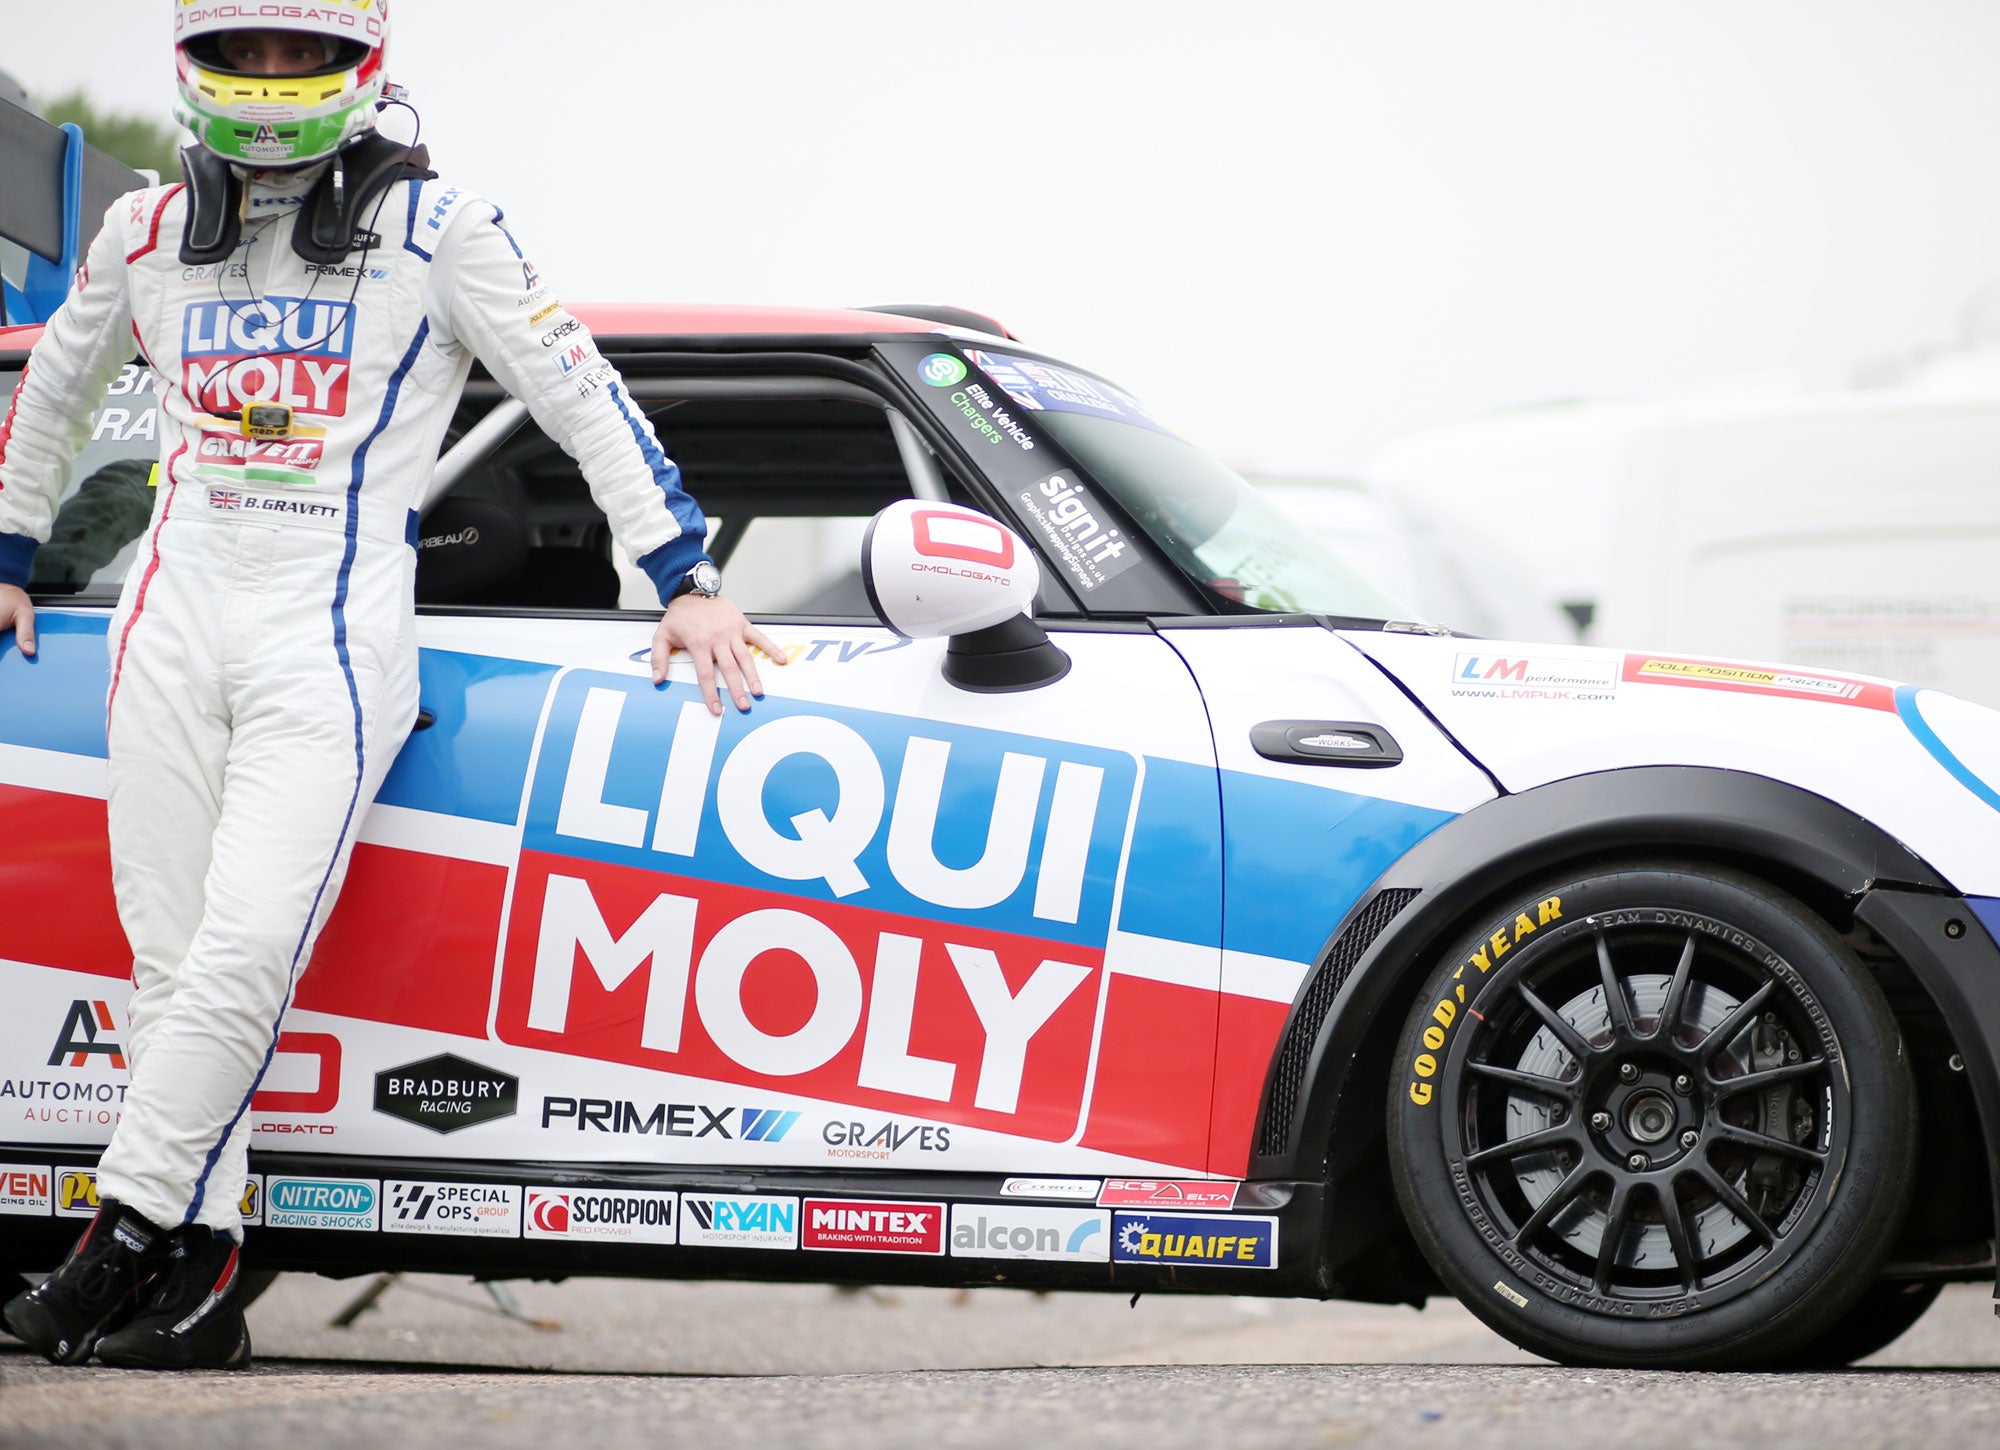 Bradley Gravett son of BTCC British Touring Car Champion Robb Gravett in the MINI Challenge JCW Series at Brands Hatch Indy in 2021 Standing by Car in Assembly Area Graves Motorsport Cooper Racing Driver LIQUI MOLY LM Performance Thinking it Better